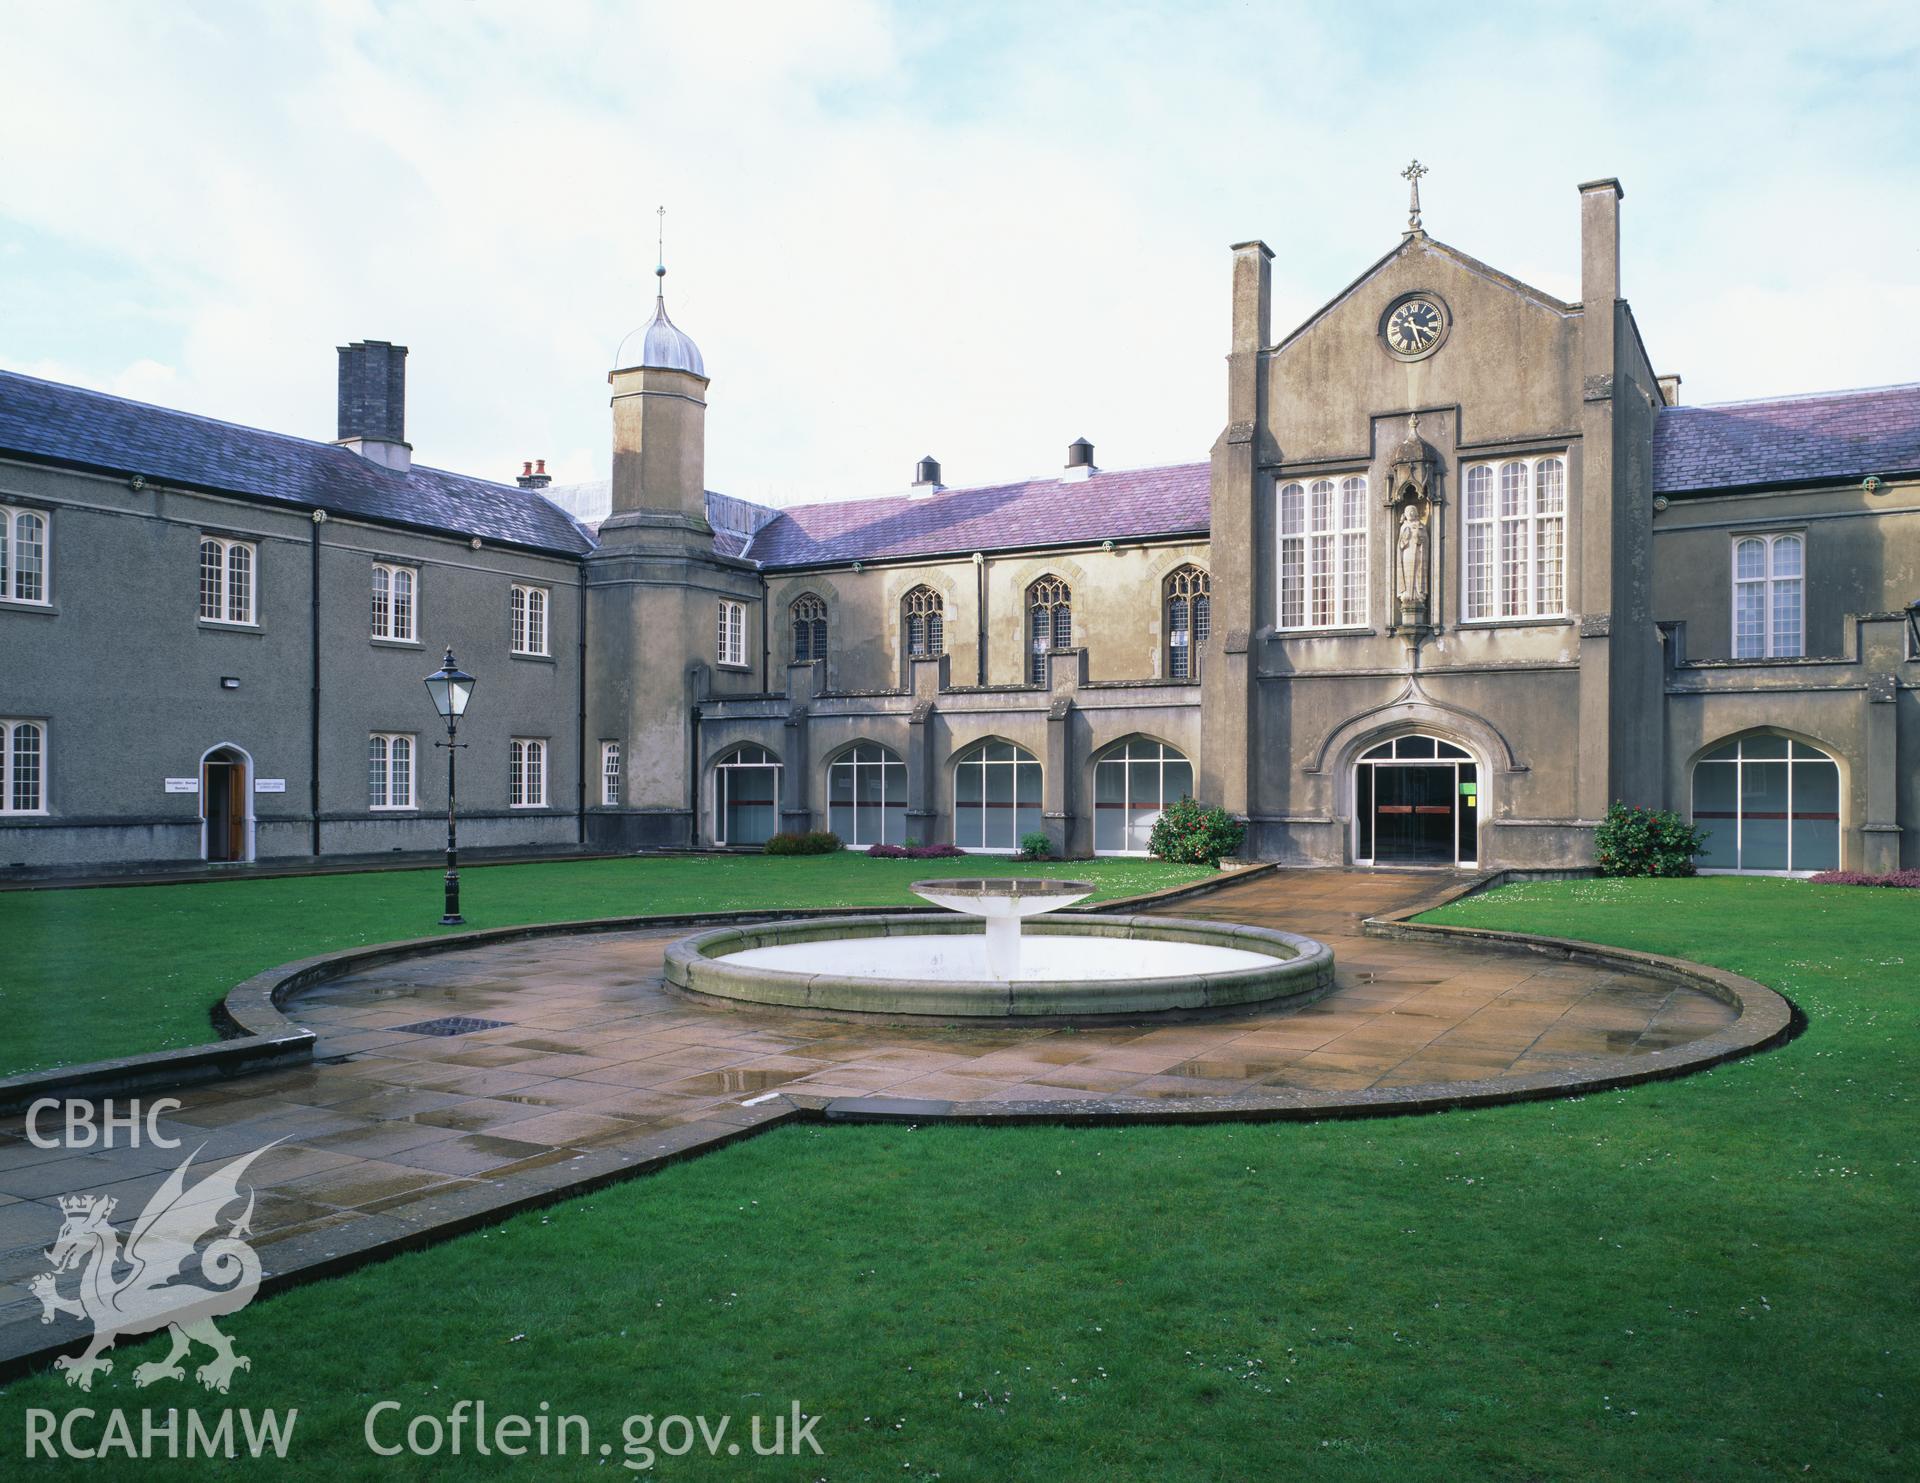 RCAHMW colour transparency showing exterior view of St David's College, Lampeter, taken by Iain Wright, 2003.